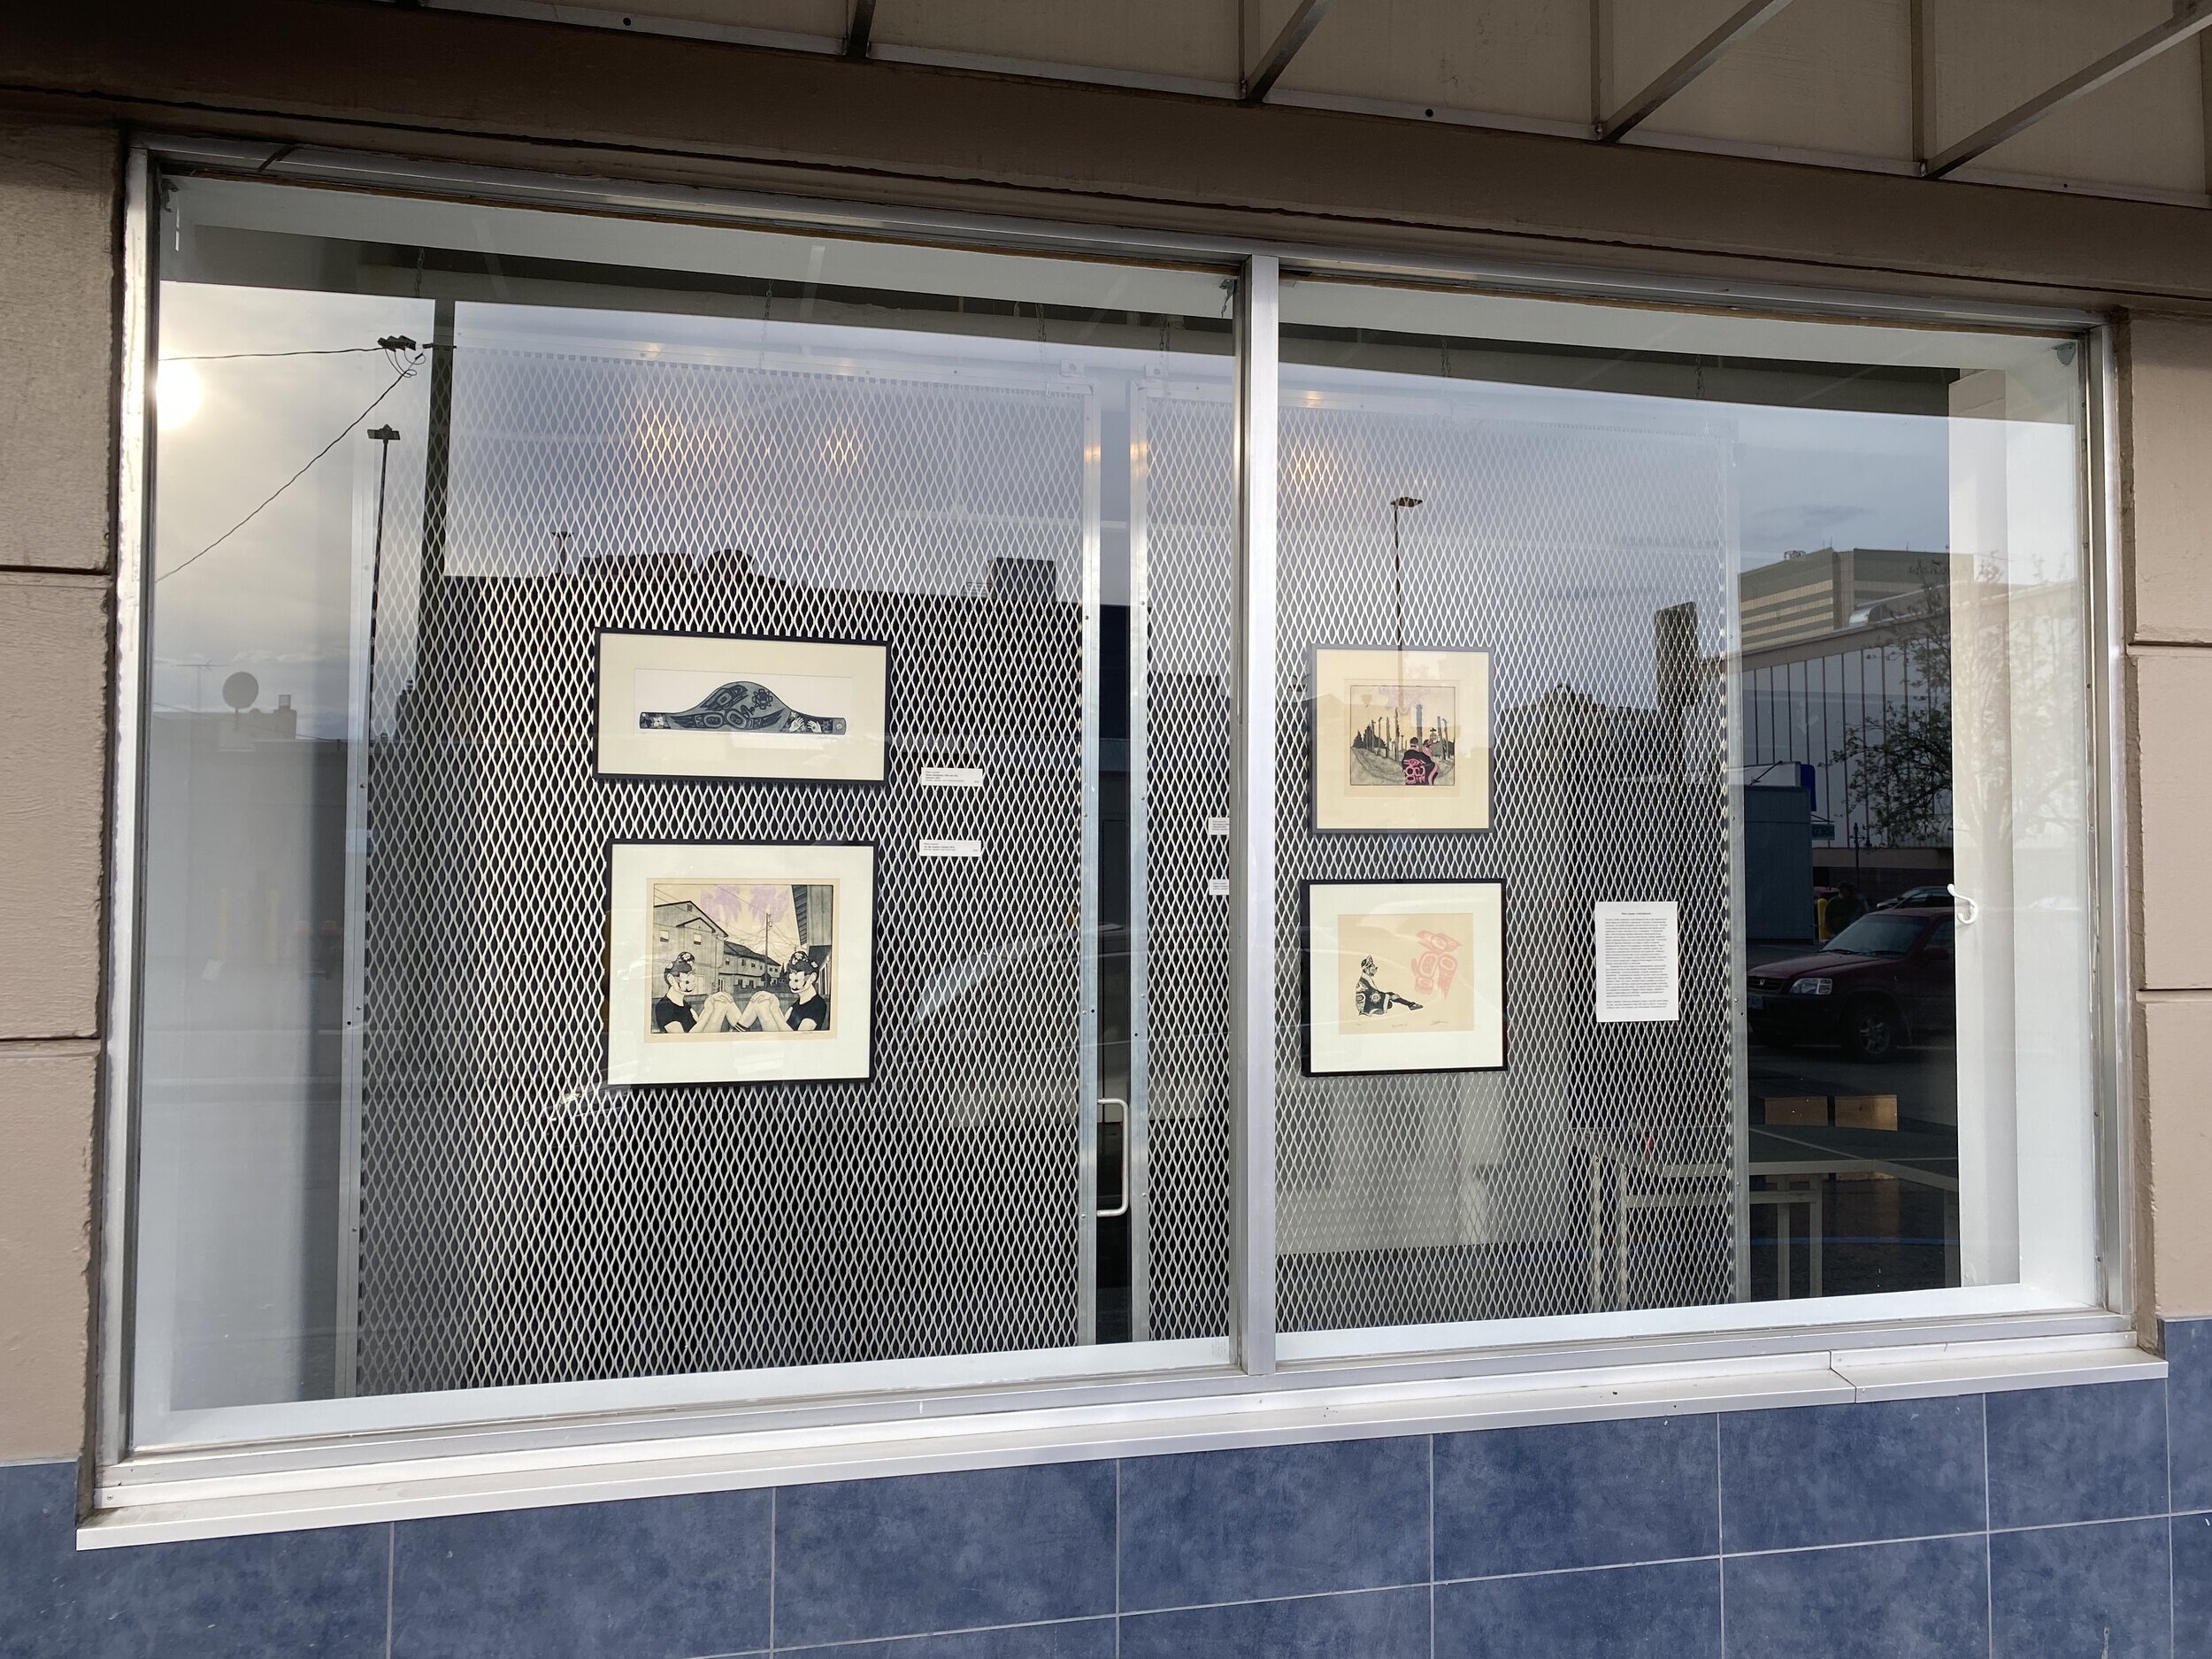  May 2020 - window display - Ethan Lauesen.   Ethan was originally scheduled to exhibit in May, but was rescheduled due to the closure. 